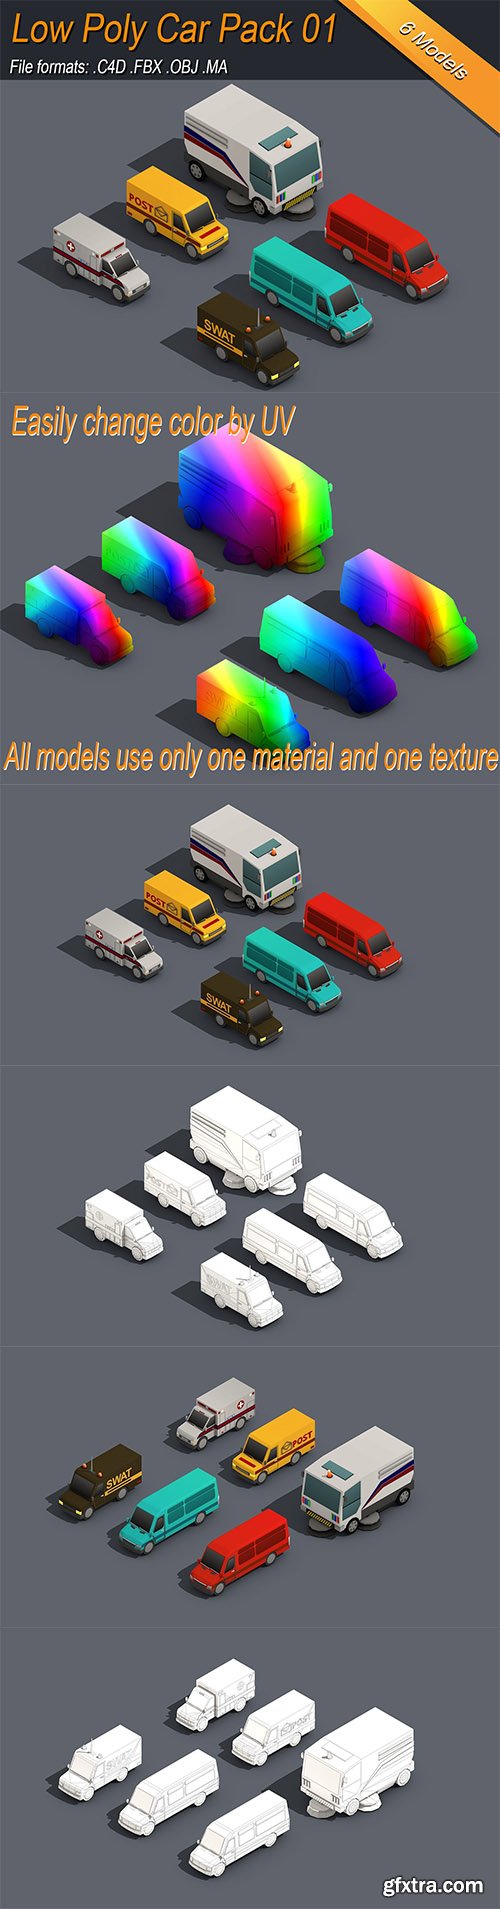 Cgtrader - Low Poly Car Pack 01 Isometric Low-poly 3D model